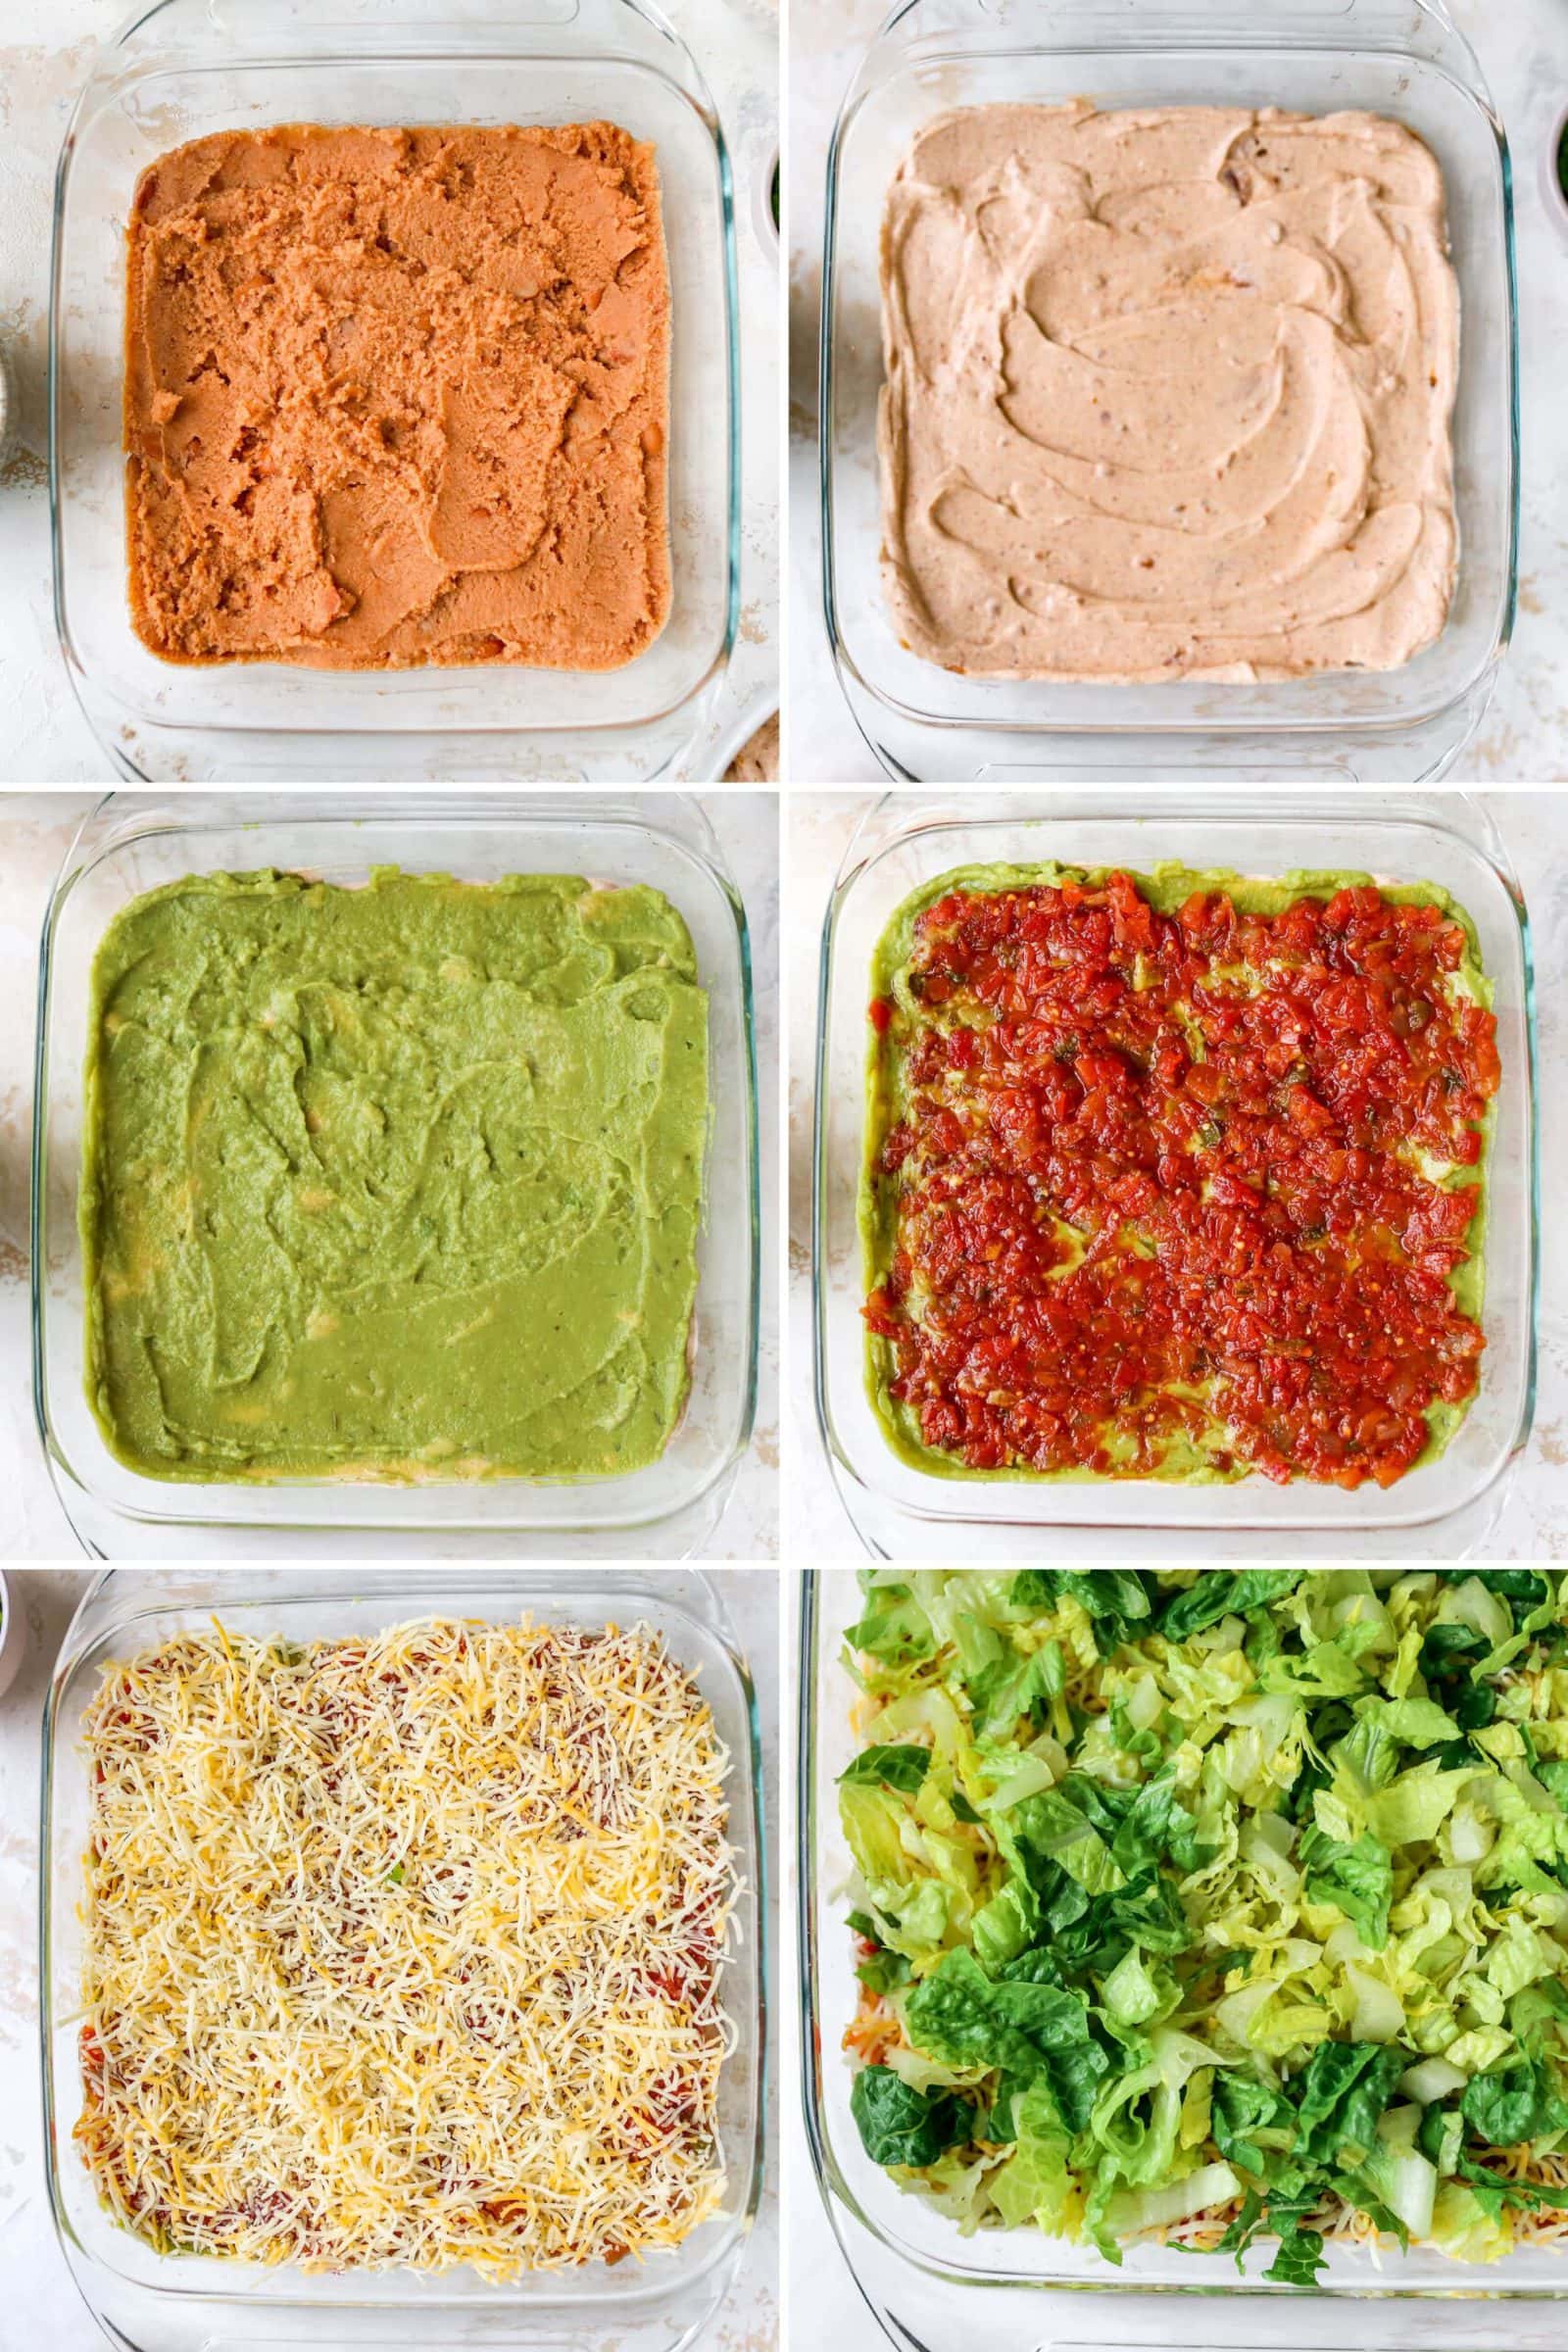 Six photos of each layer in mexican layer dip: beans, sour cream, guacamole, salsa, cheese and lettuce.